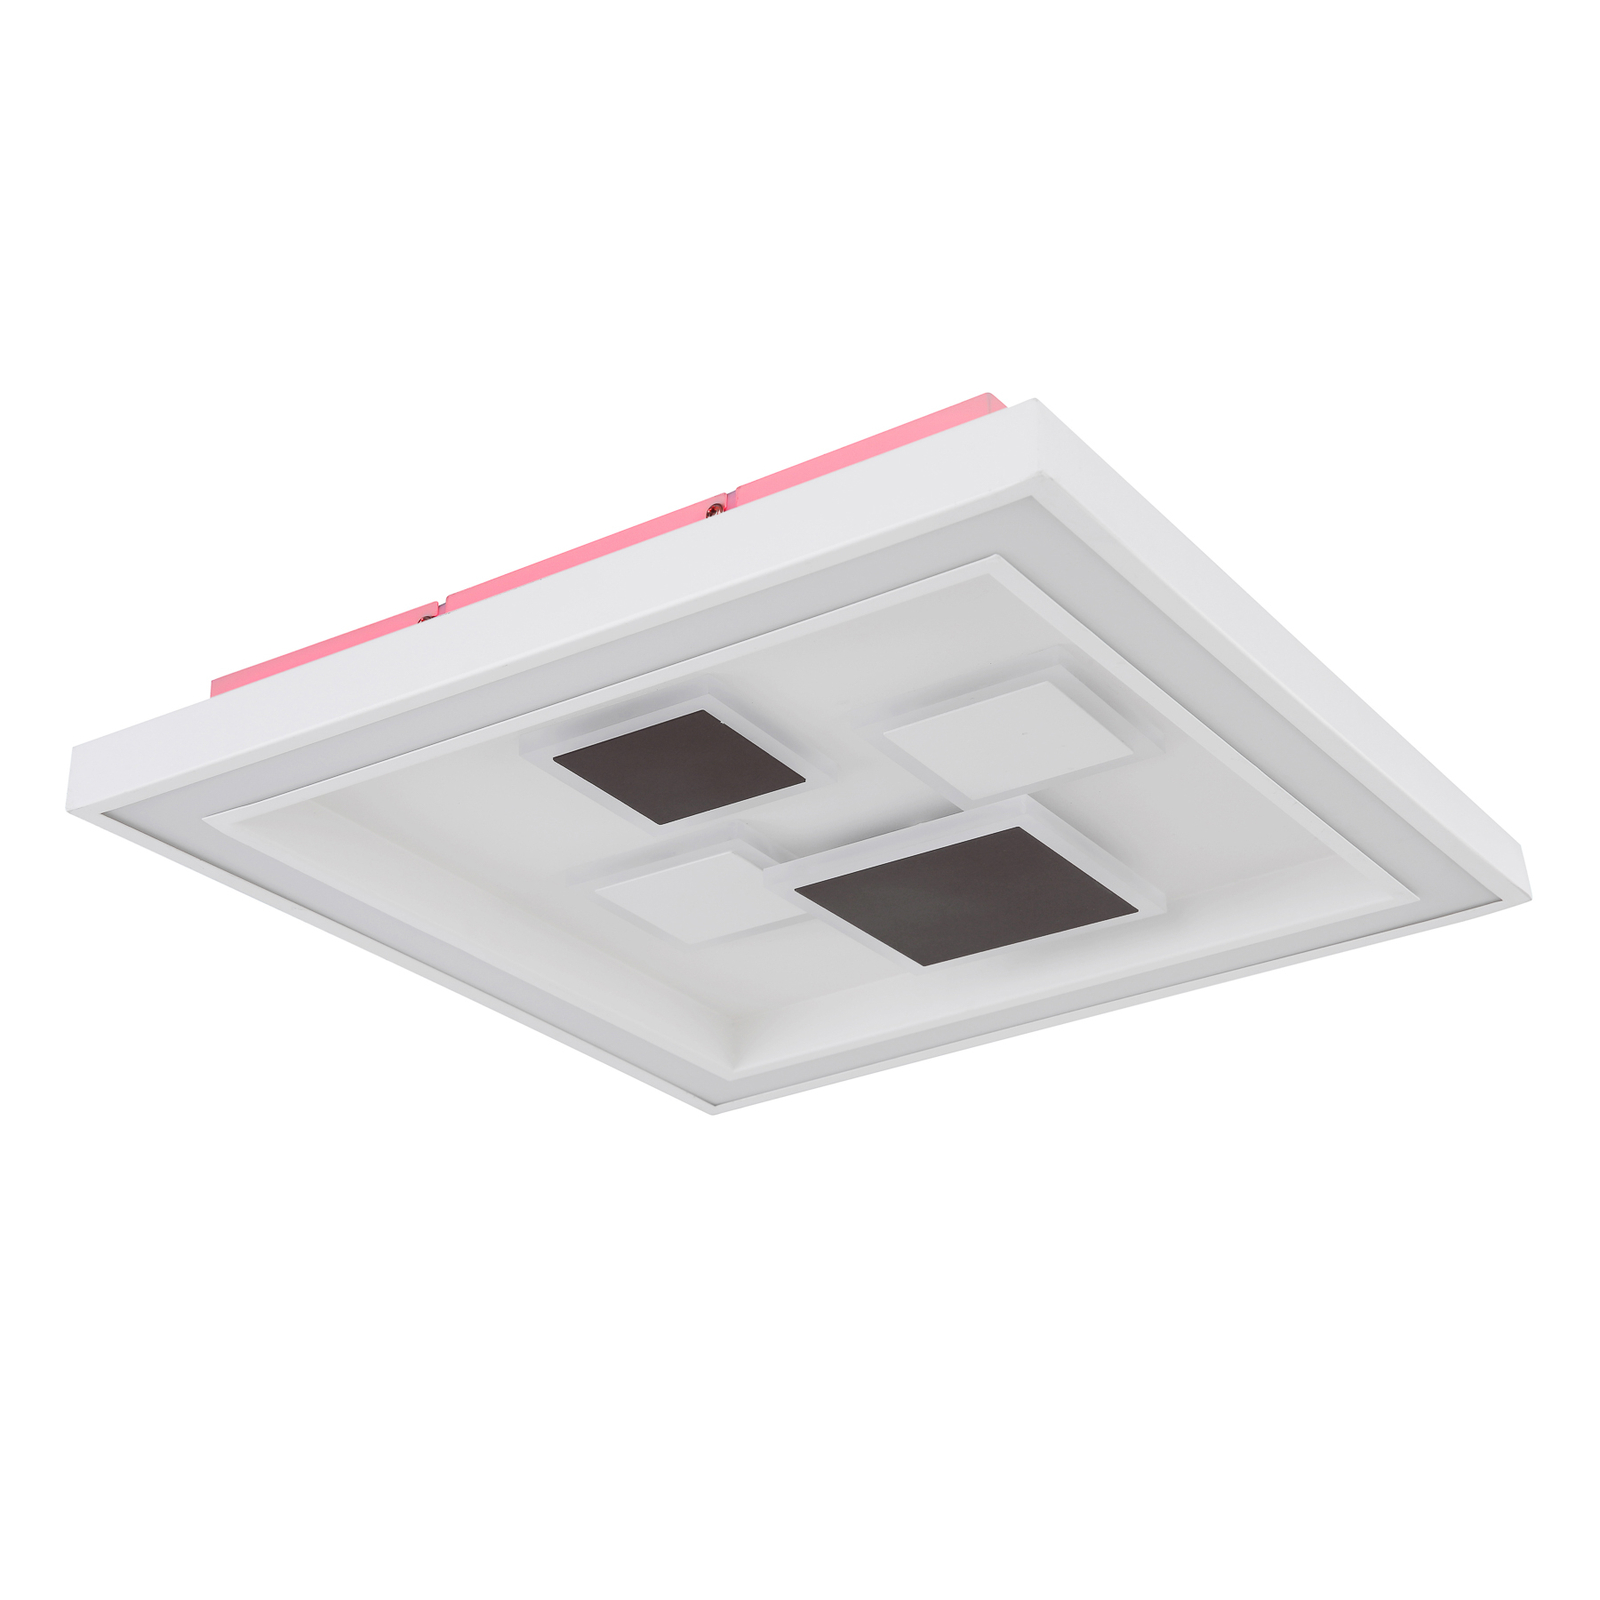 Nolo LED ceiling light, angular, dimmable, CCT